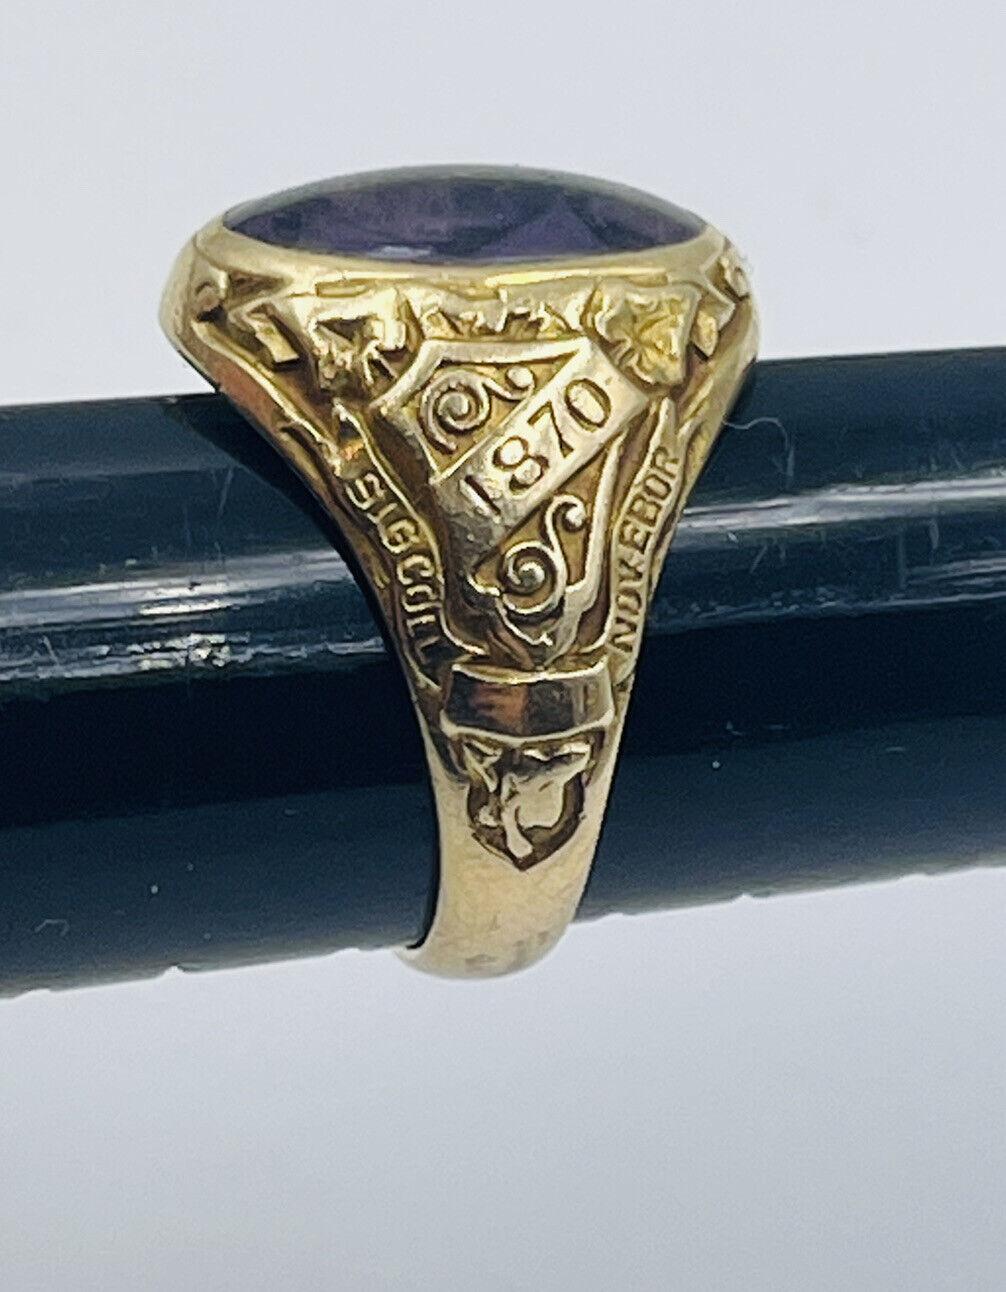 Tiffany & Co. 14k Yellow Gold & Amethyst Hunter College Class Ring Art Deco Circa 1922

Here is your chance to purchase a beautiful and highly collectible designer ring.  Truly a great piece at a great price! 
Hunter College 1922 school class ring